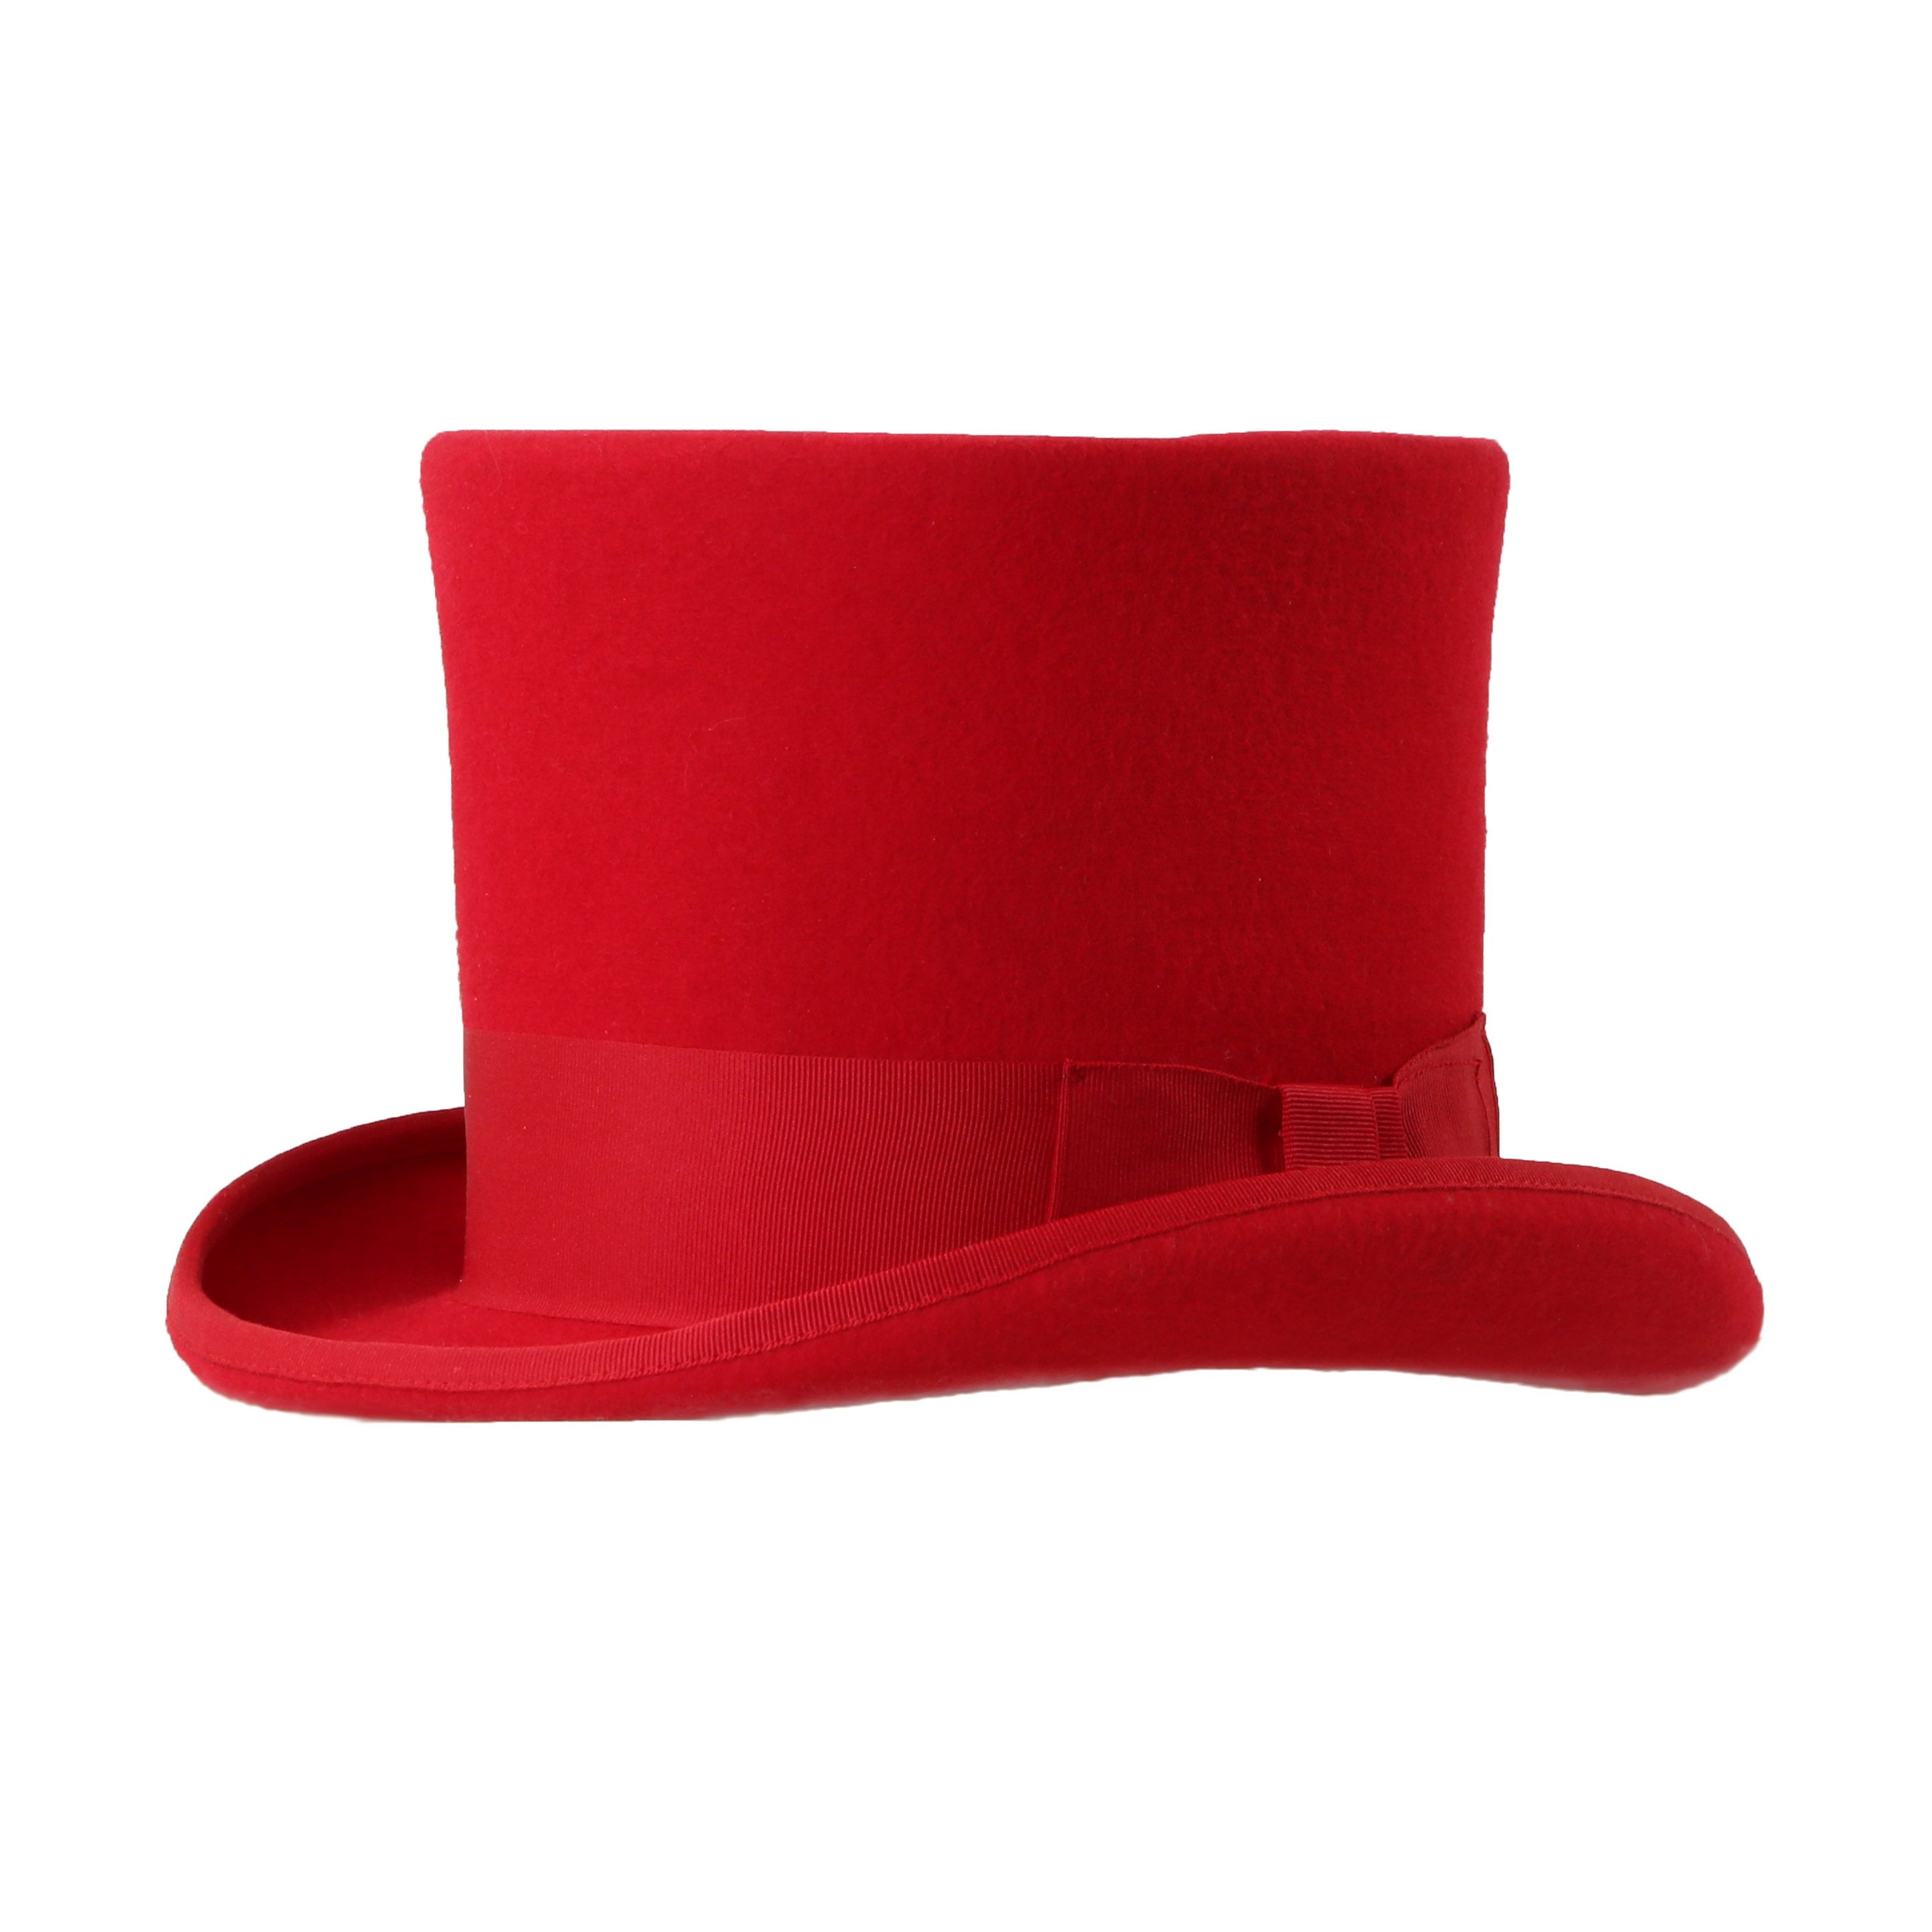 Wine Red 100% Wool Bowler Hat High Quality with Removable Feather Satin Lined